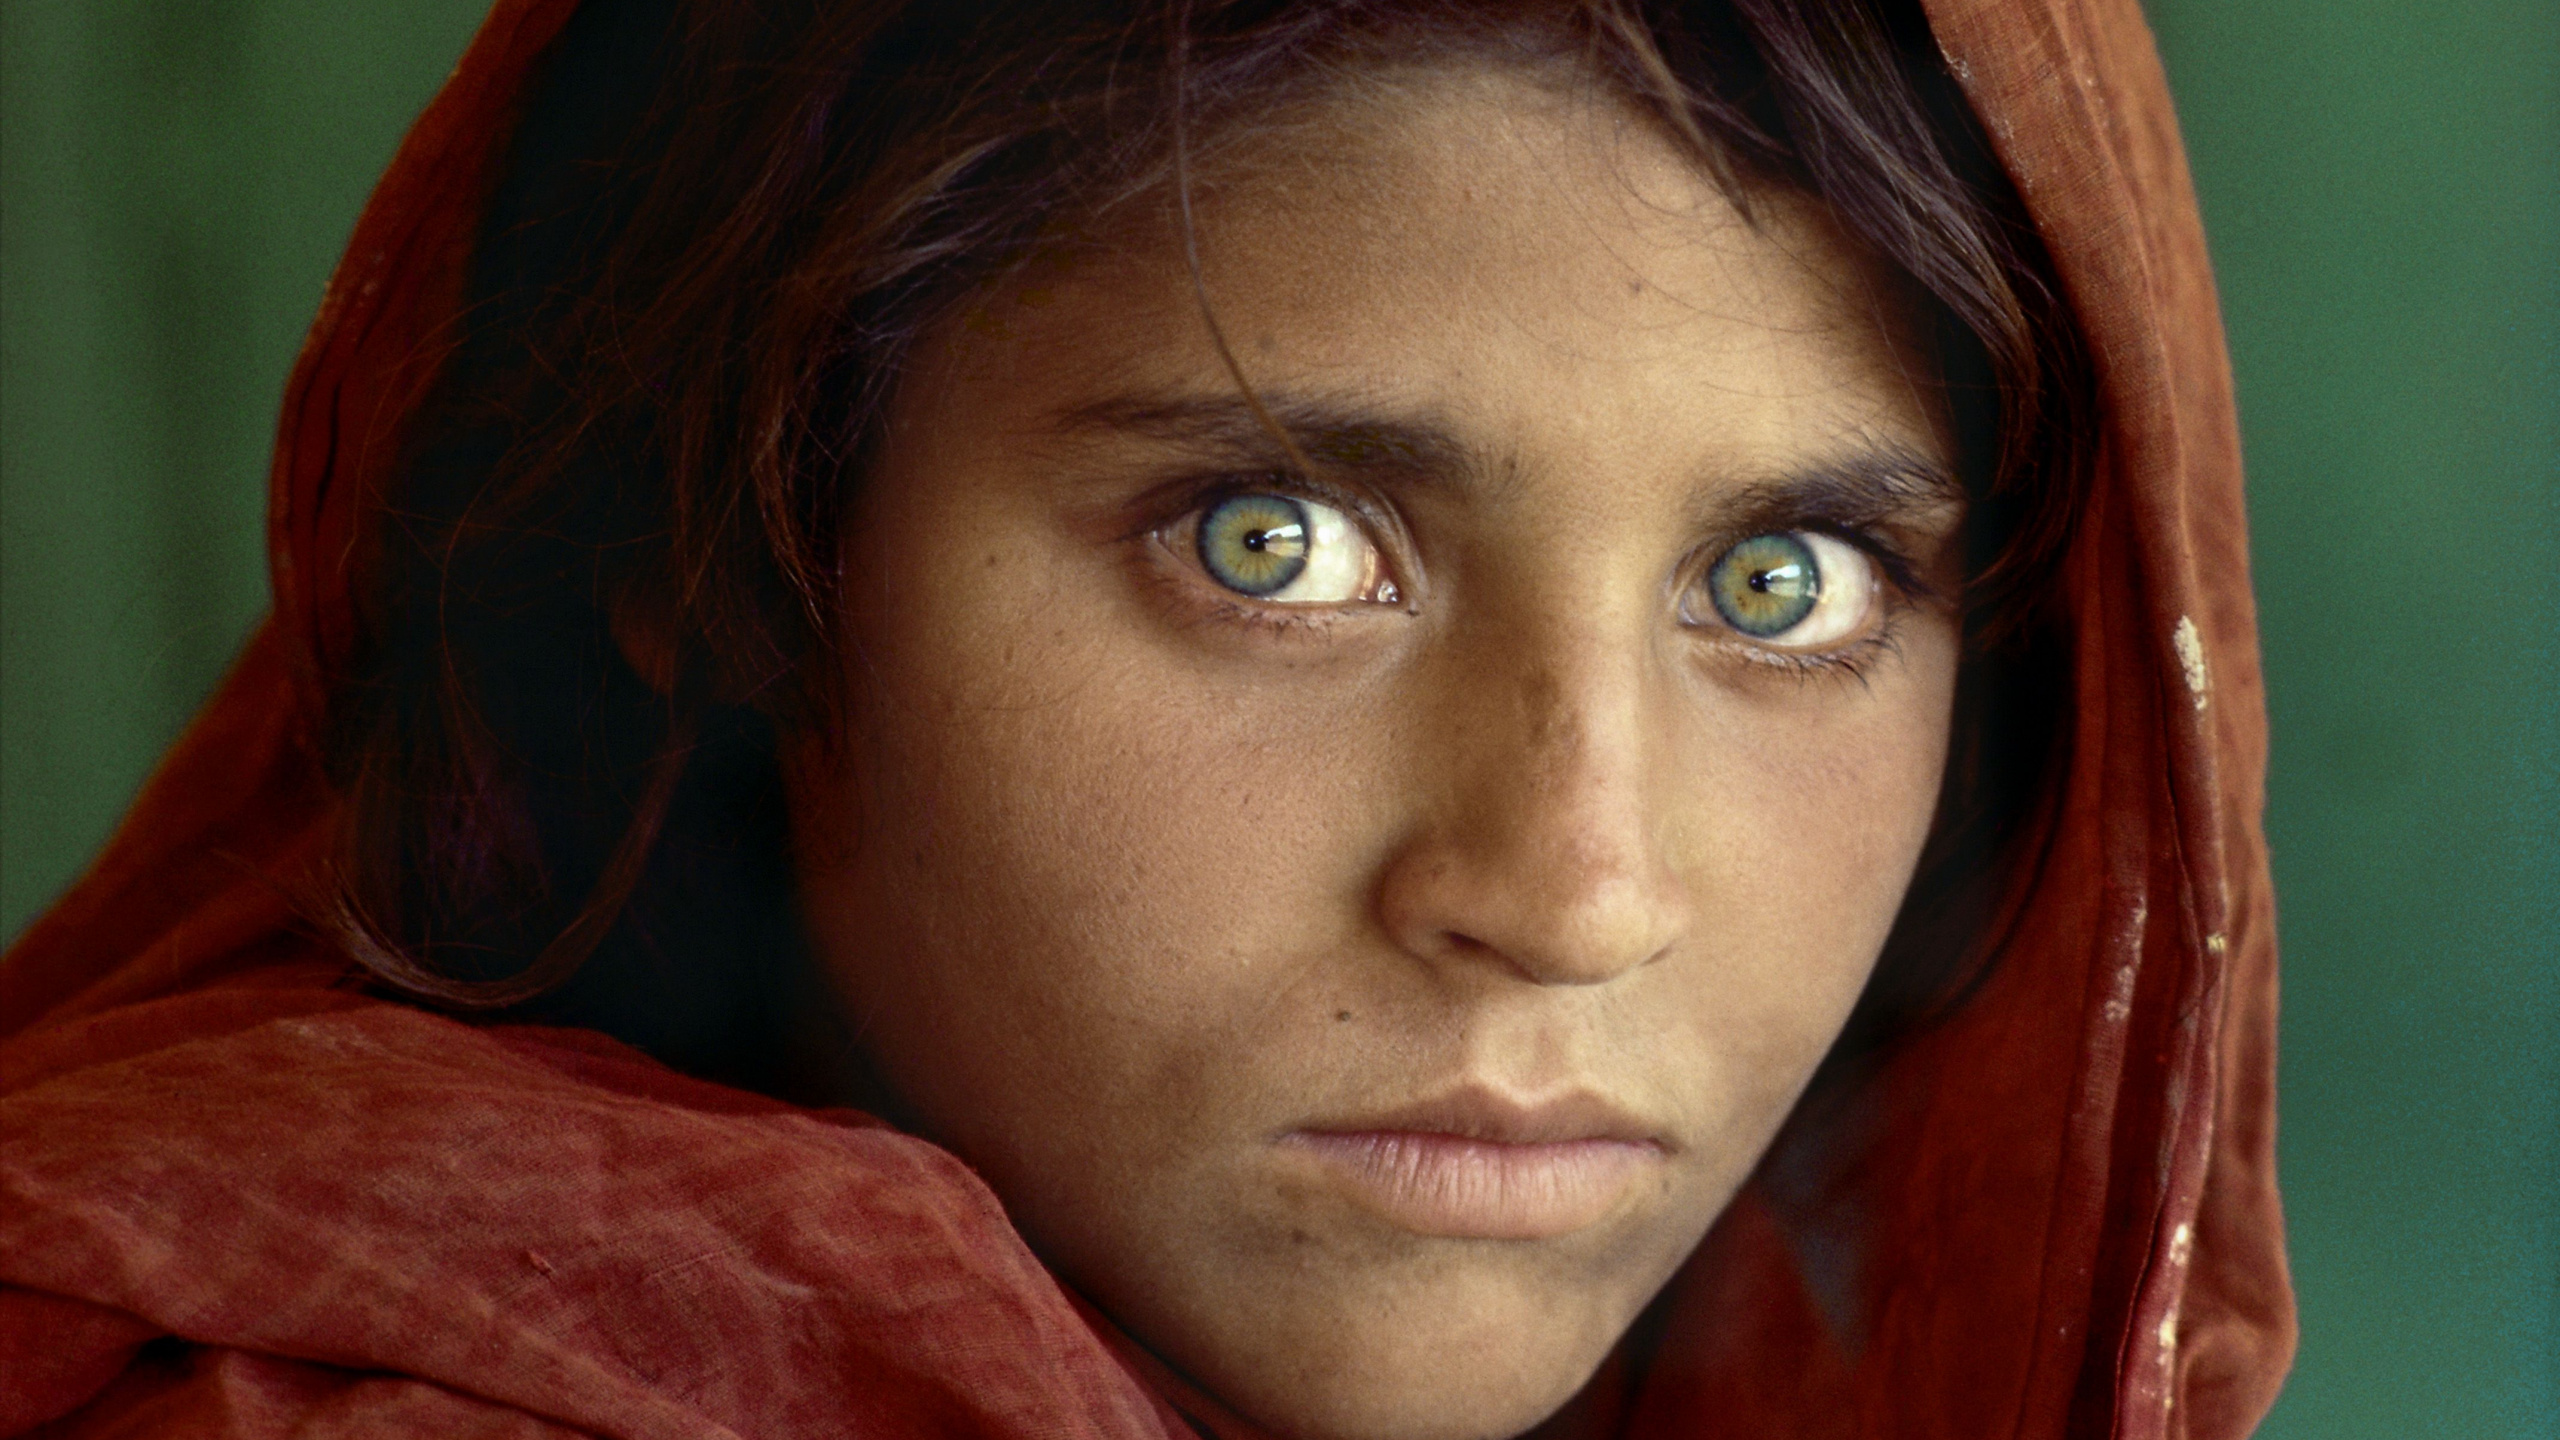 Afghan Girl, Afghanistan, National Geographic, Face, Eye. Wallpaper in 2560x1440 Resolution